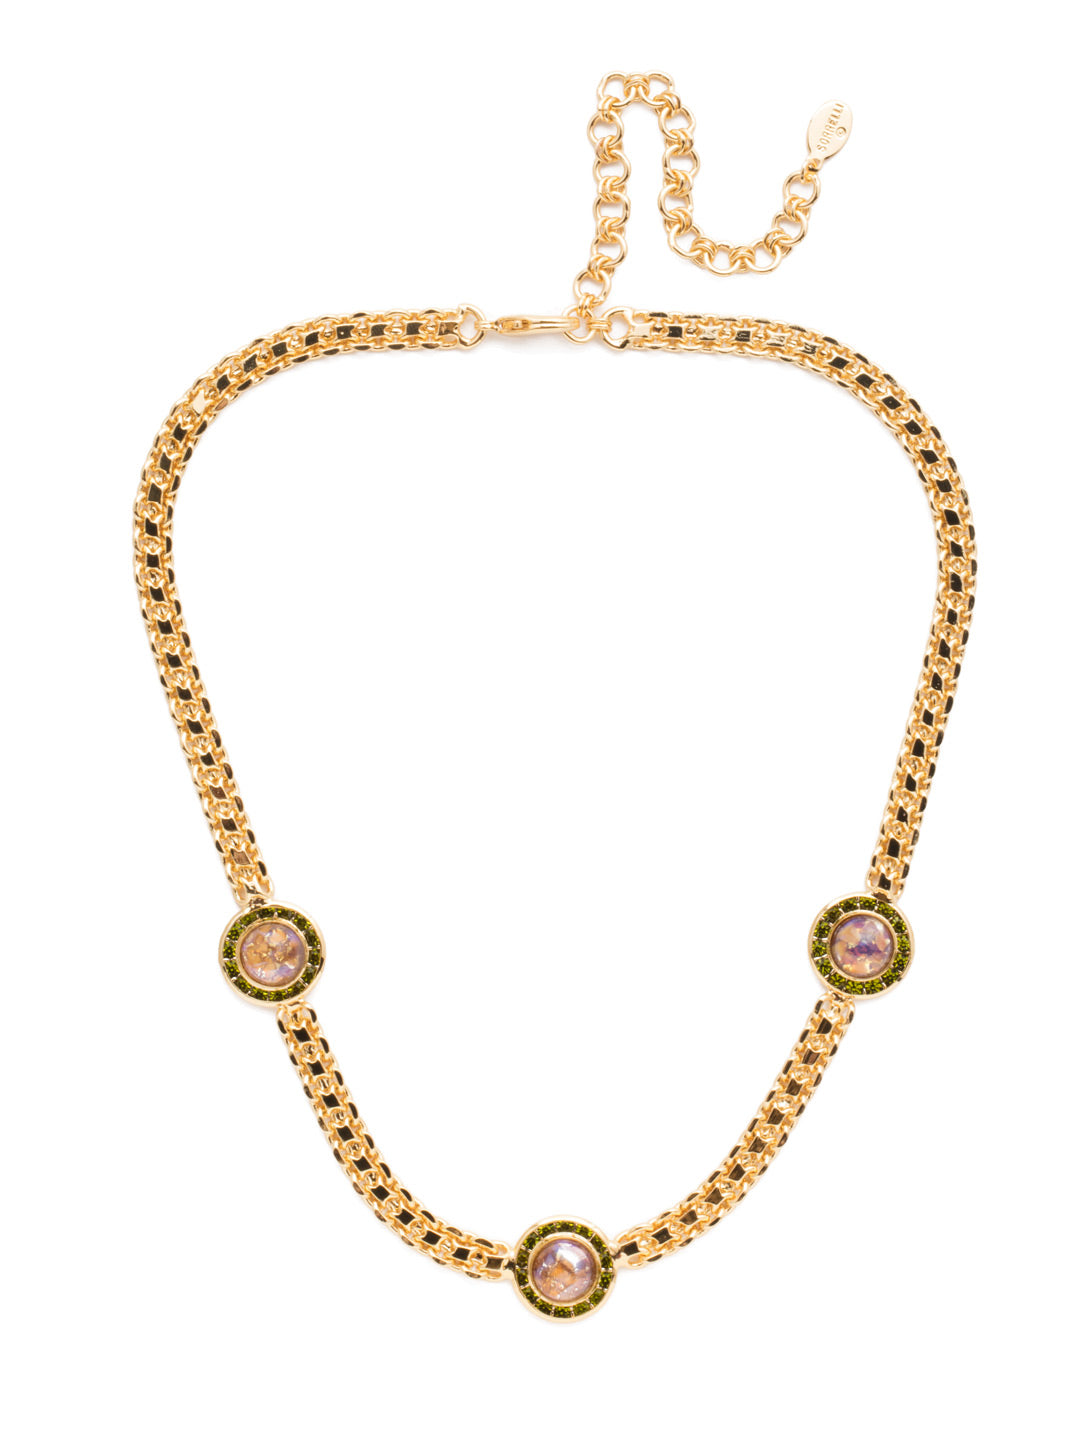 Alberta Tennis Necklace - NET12BGCSM - <p>Our Alberta Tennis Necklace is for the invidual who appreciates a bold chain but doesn't want to forgo a bit of sparkle. That comes in the form of opaque stones rimmed in shimmering crystals. From Sorrelli's Cashmere collection in our Bright Gold-tone finish.</p>